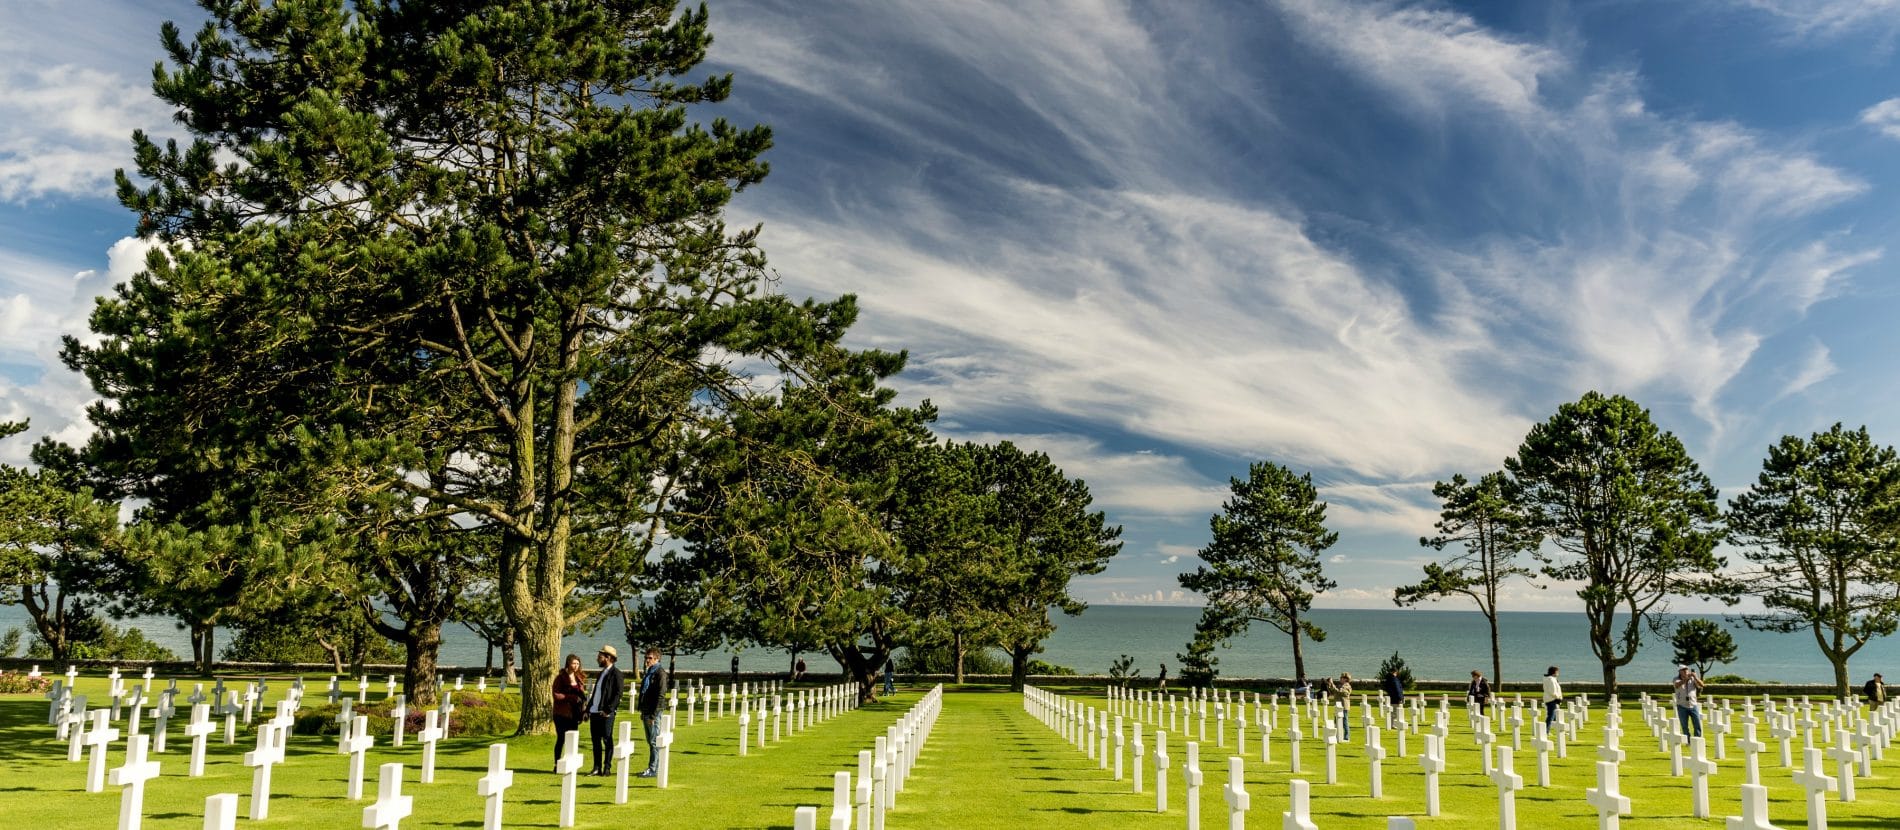 The Normandy American Cemetery and Memorial in Colleville-sur-Mer